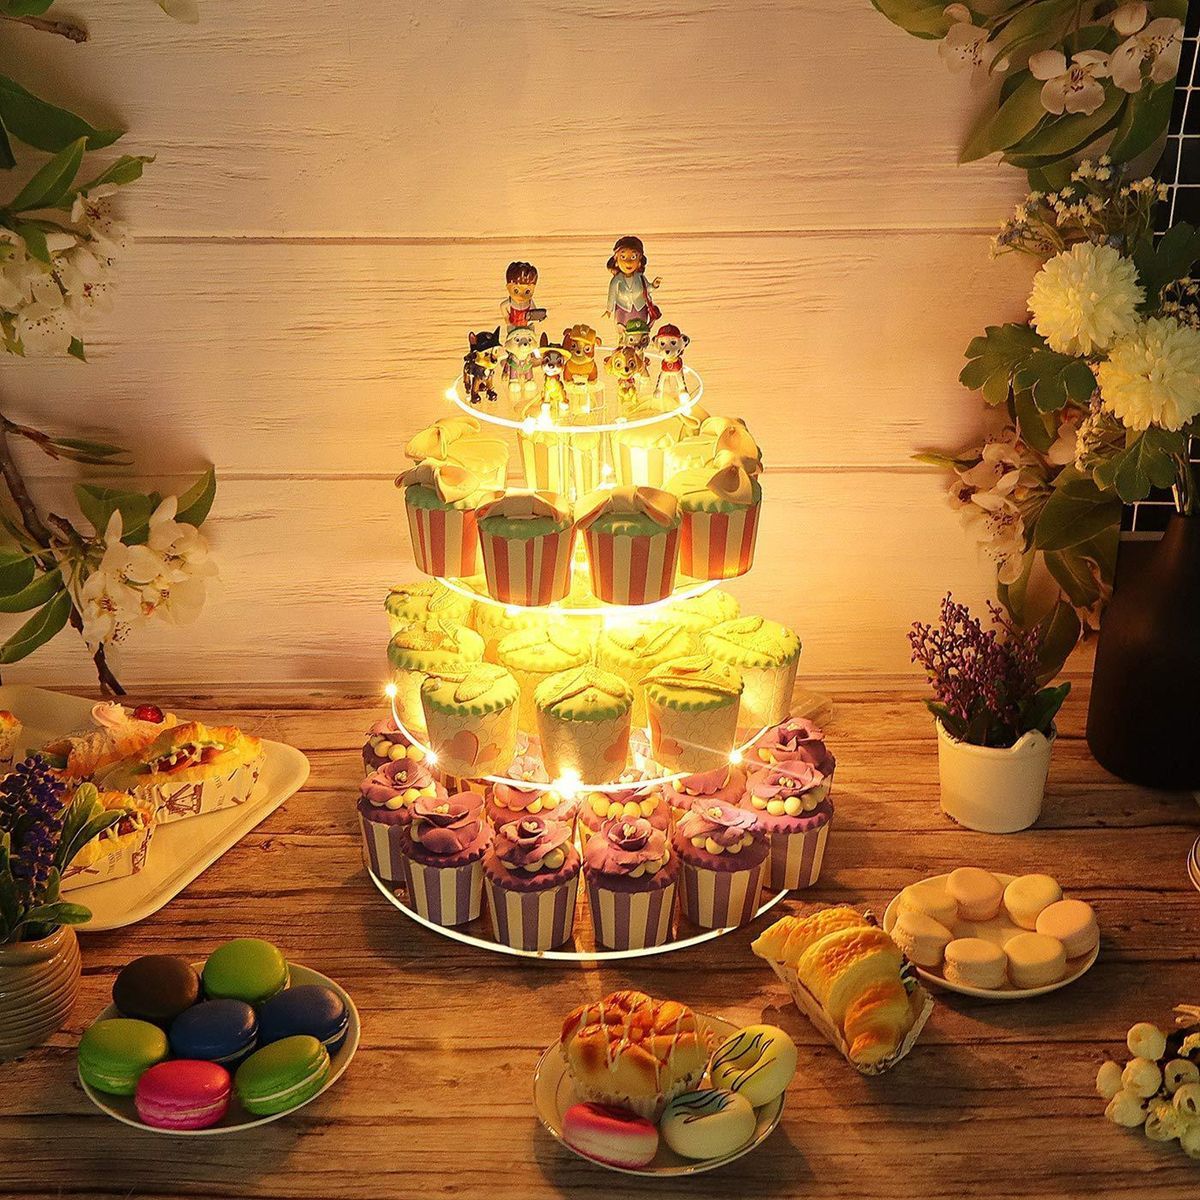 4-Layer-Cake-Stand-Tray-Wedding-Party-Cupcake-Display-Holder-LED-String-Light-Decorations-1639609